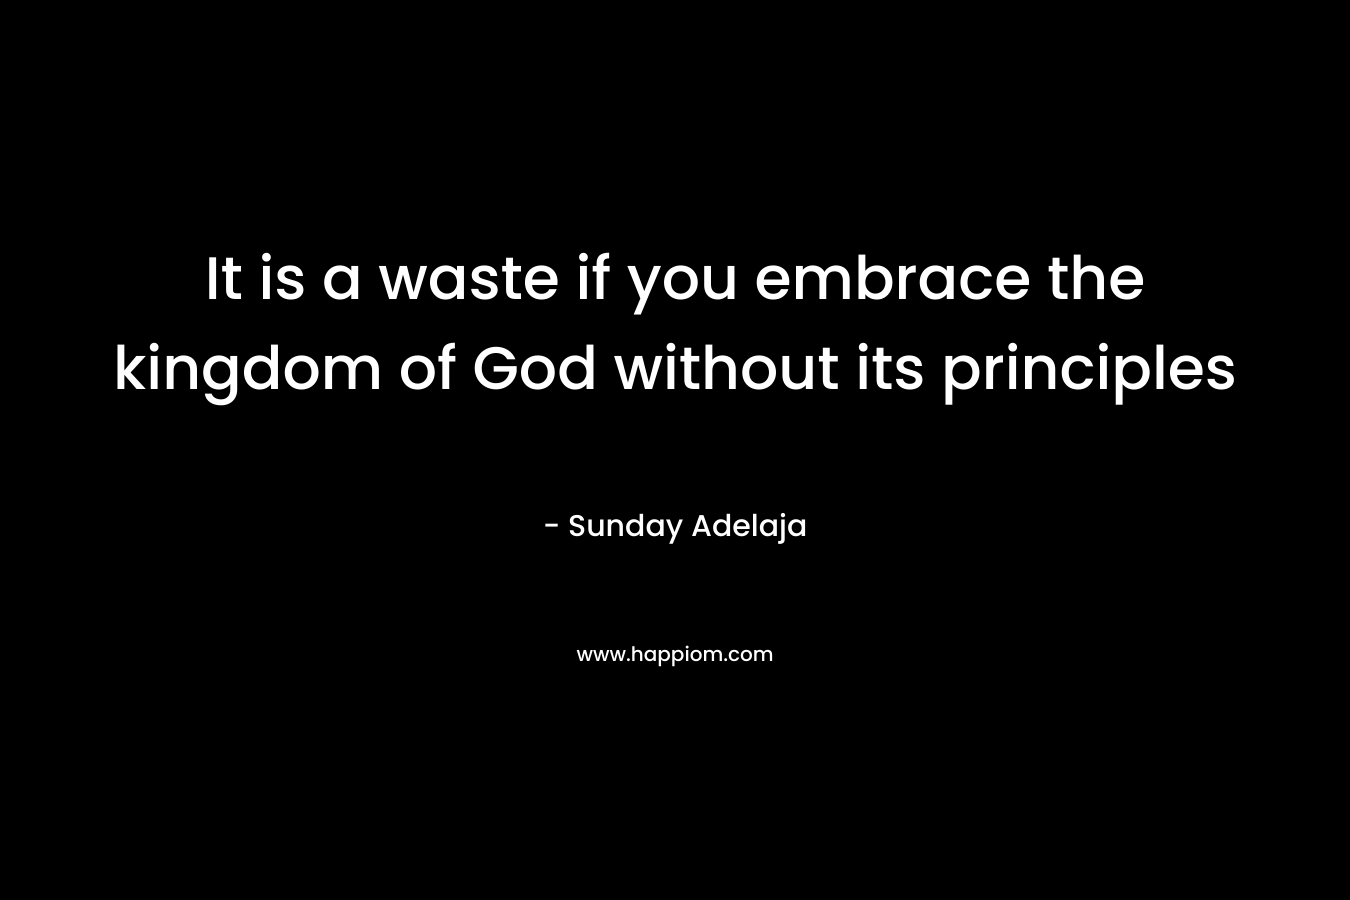 It is a waste if you embrace the kingdom of God without its principles